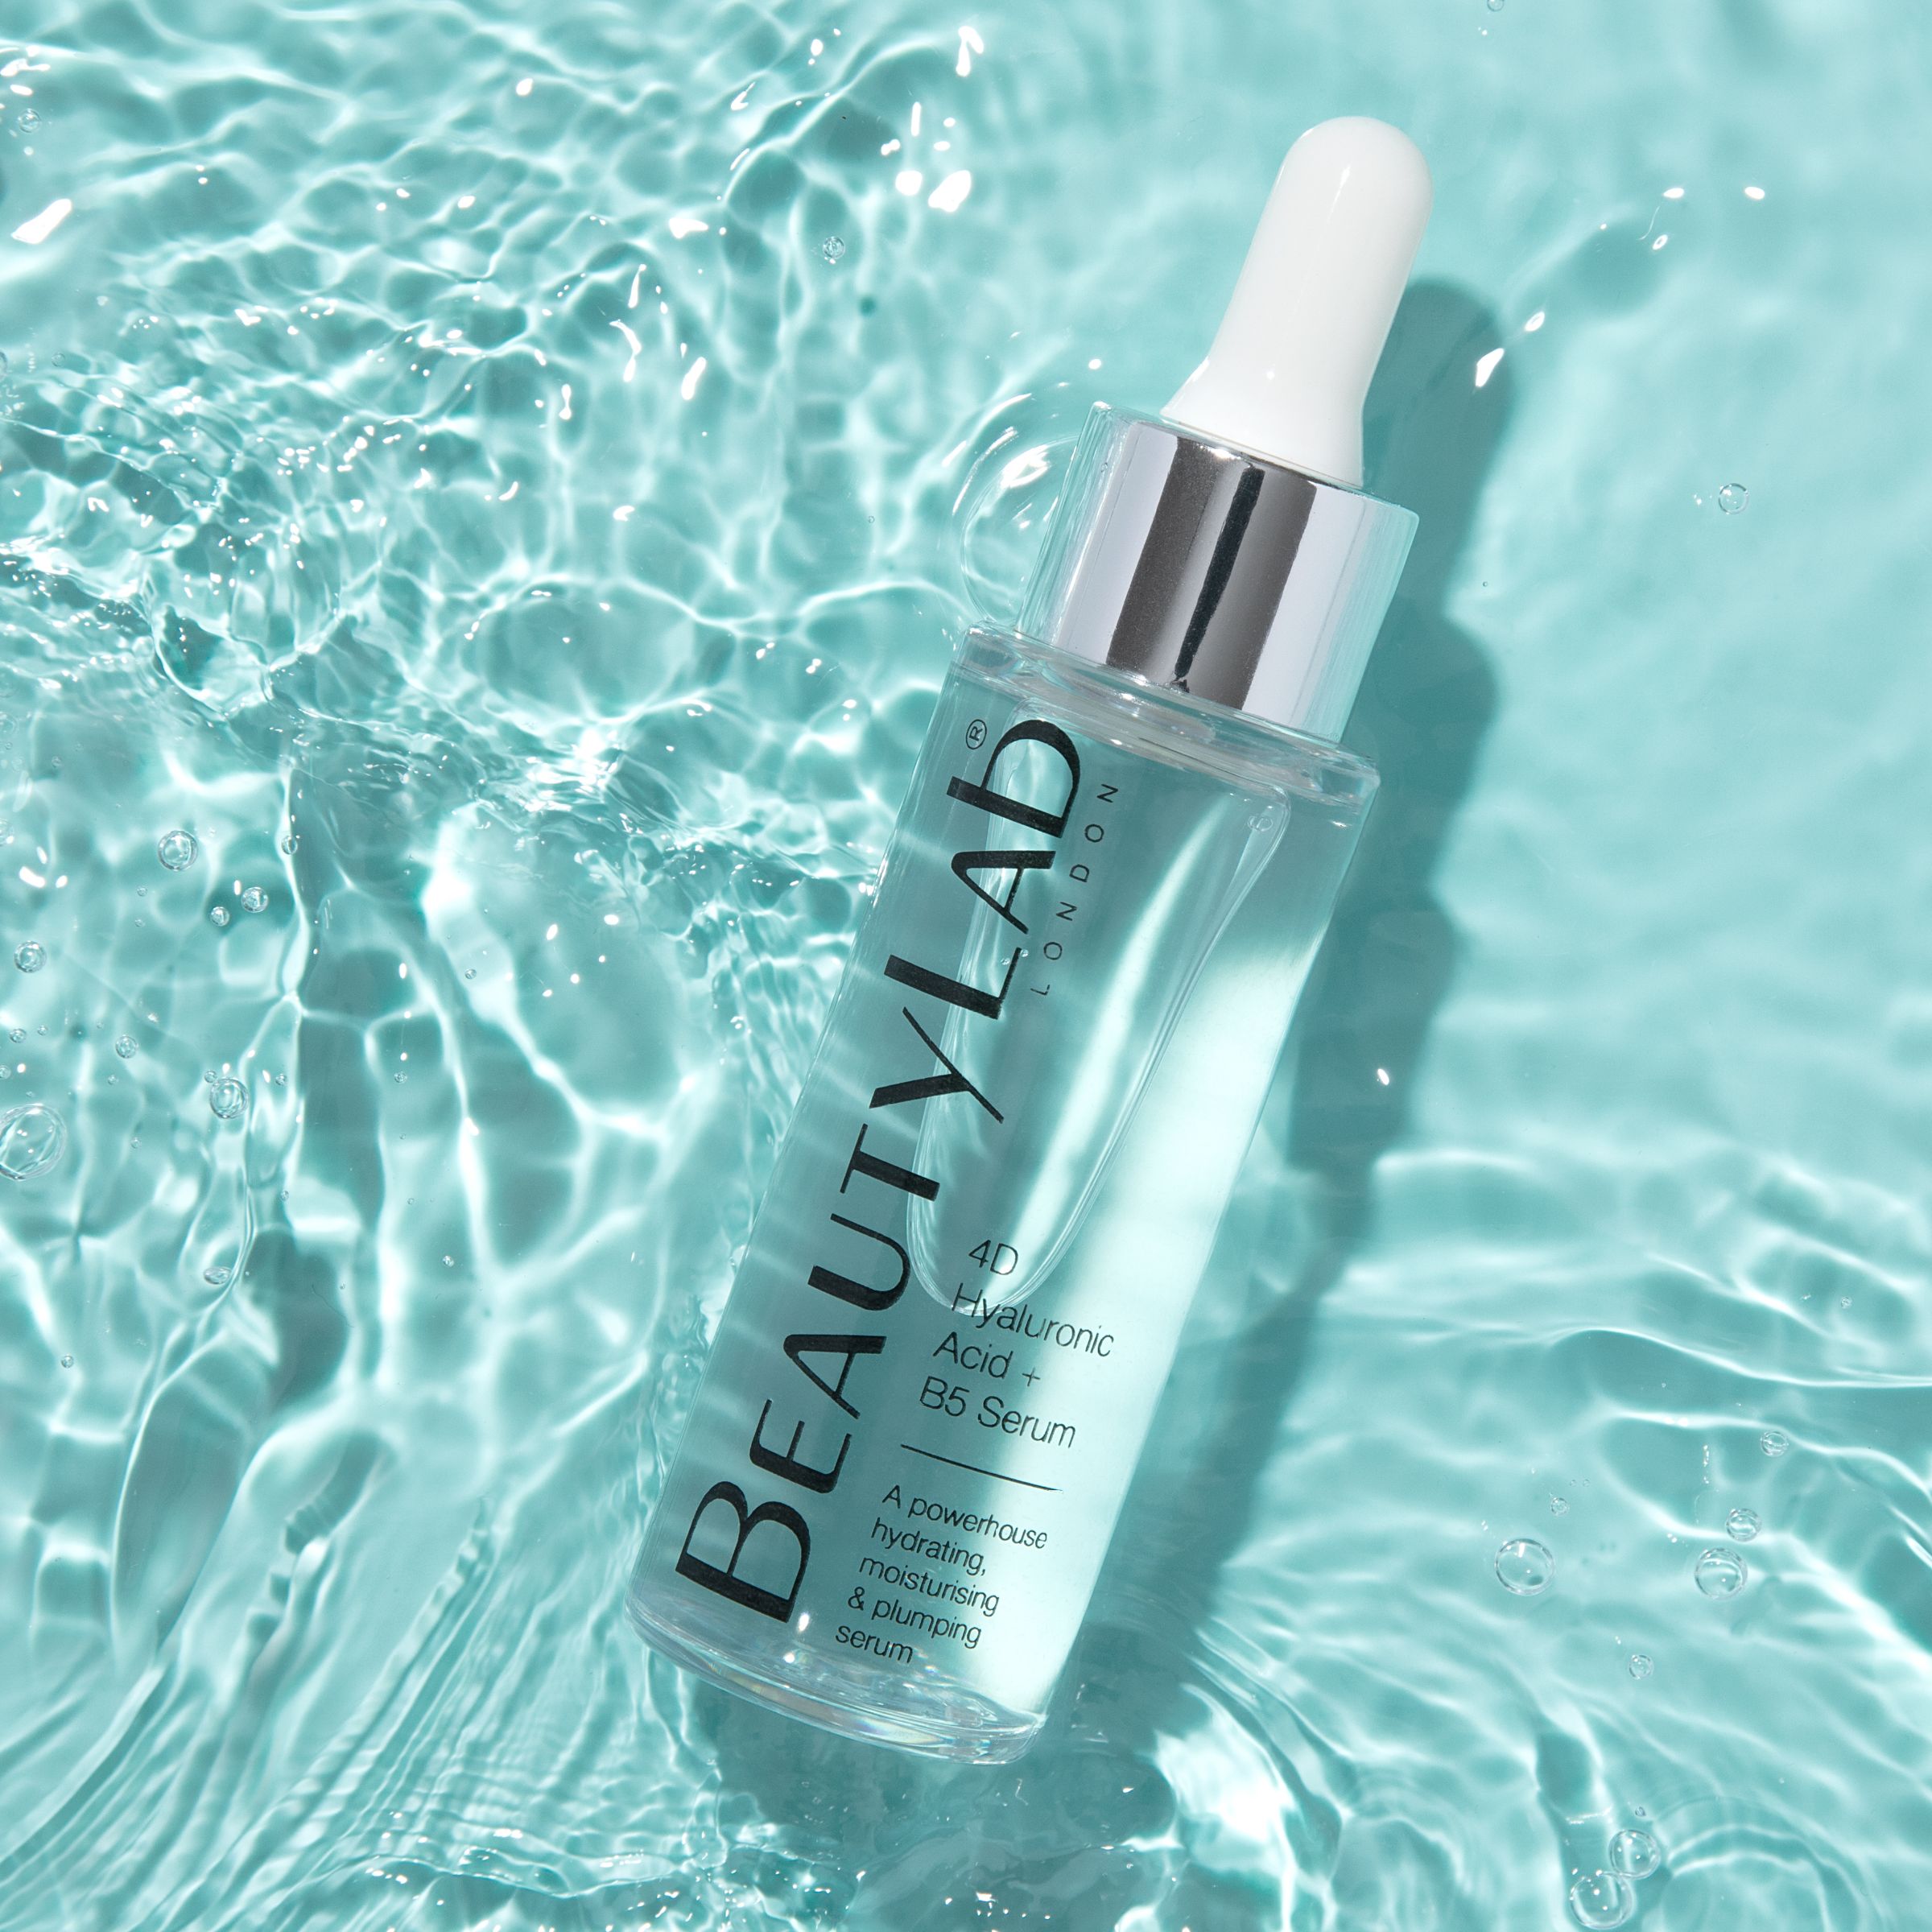 beautylab product with clear water background 